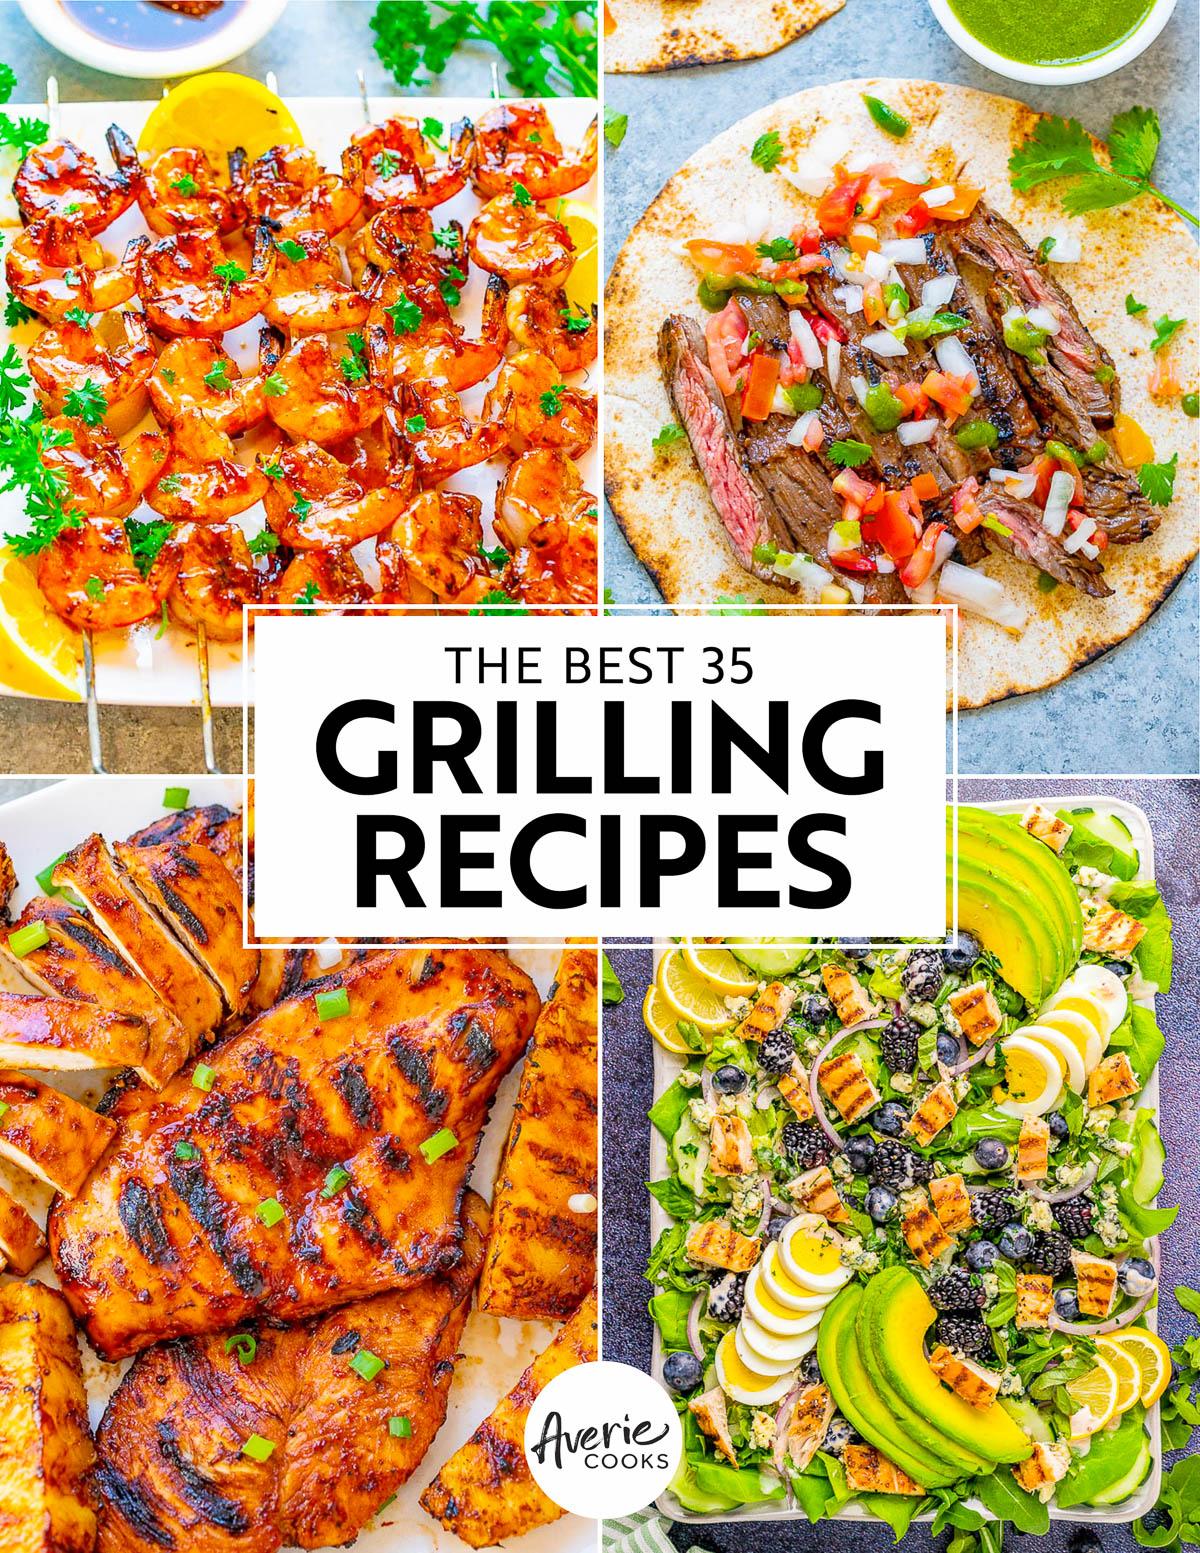 Collage of various grilled dishes including chicken, beef, and salads, labeled "the best 35 grilling recipes" from averie cooks.